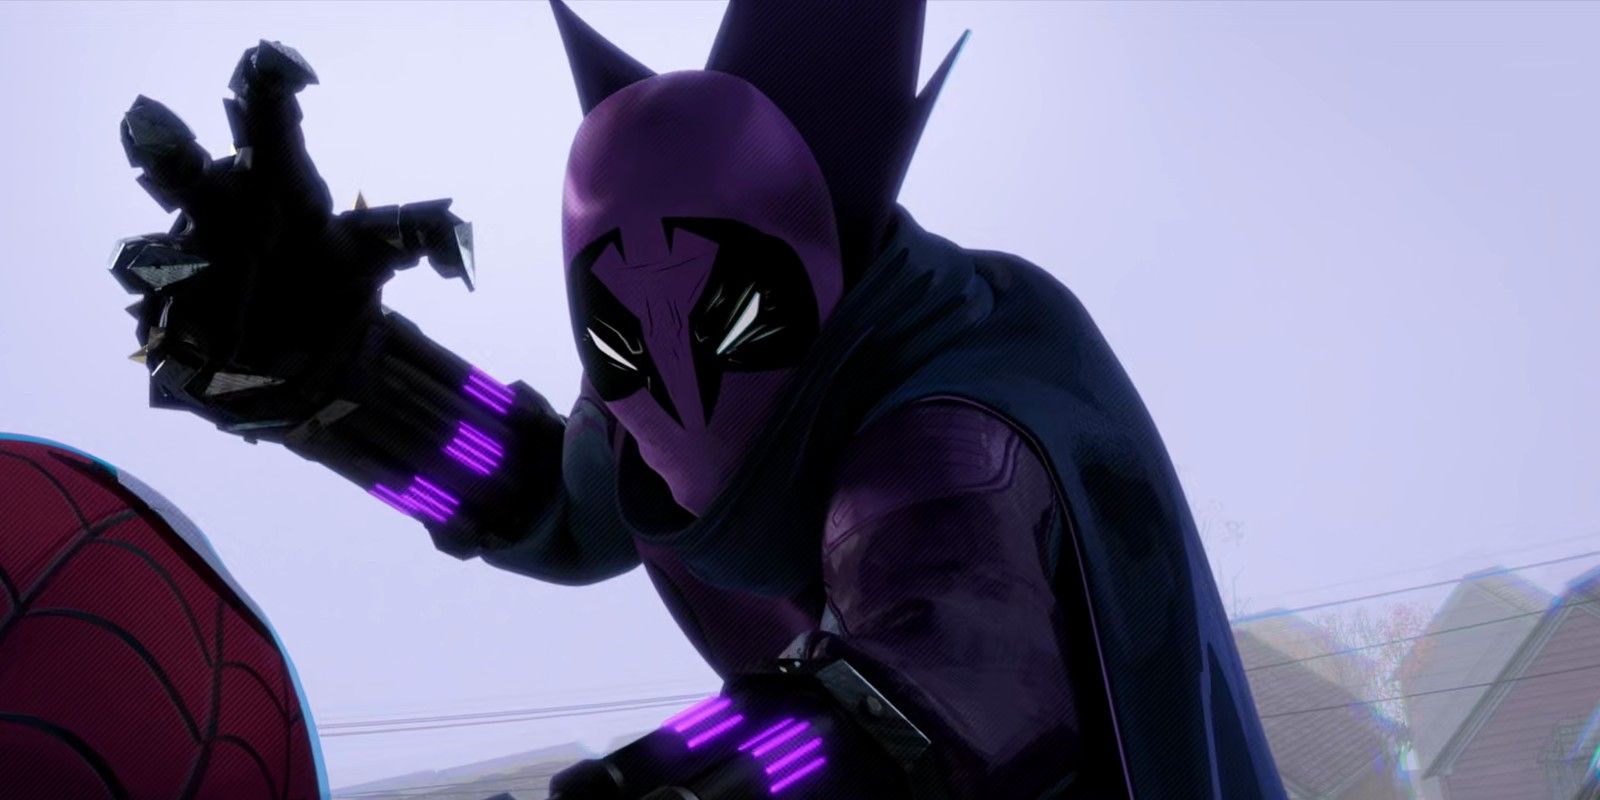 Prowler with his claws ready in Spider-Man: Into the Spider-Verse 